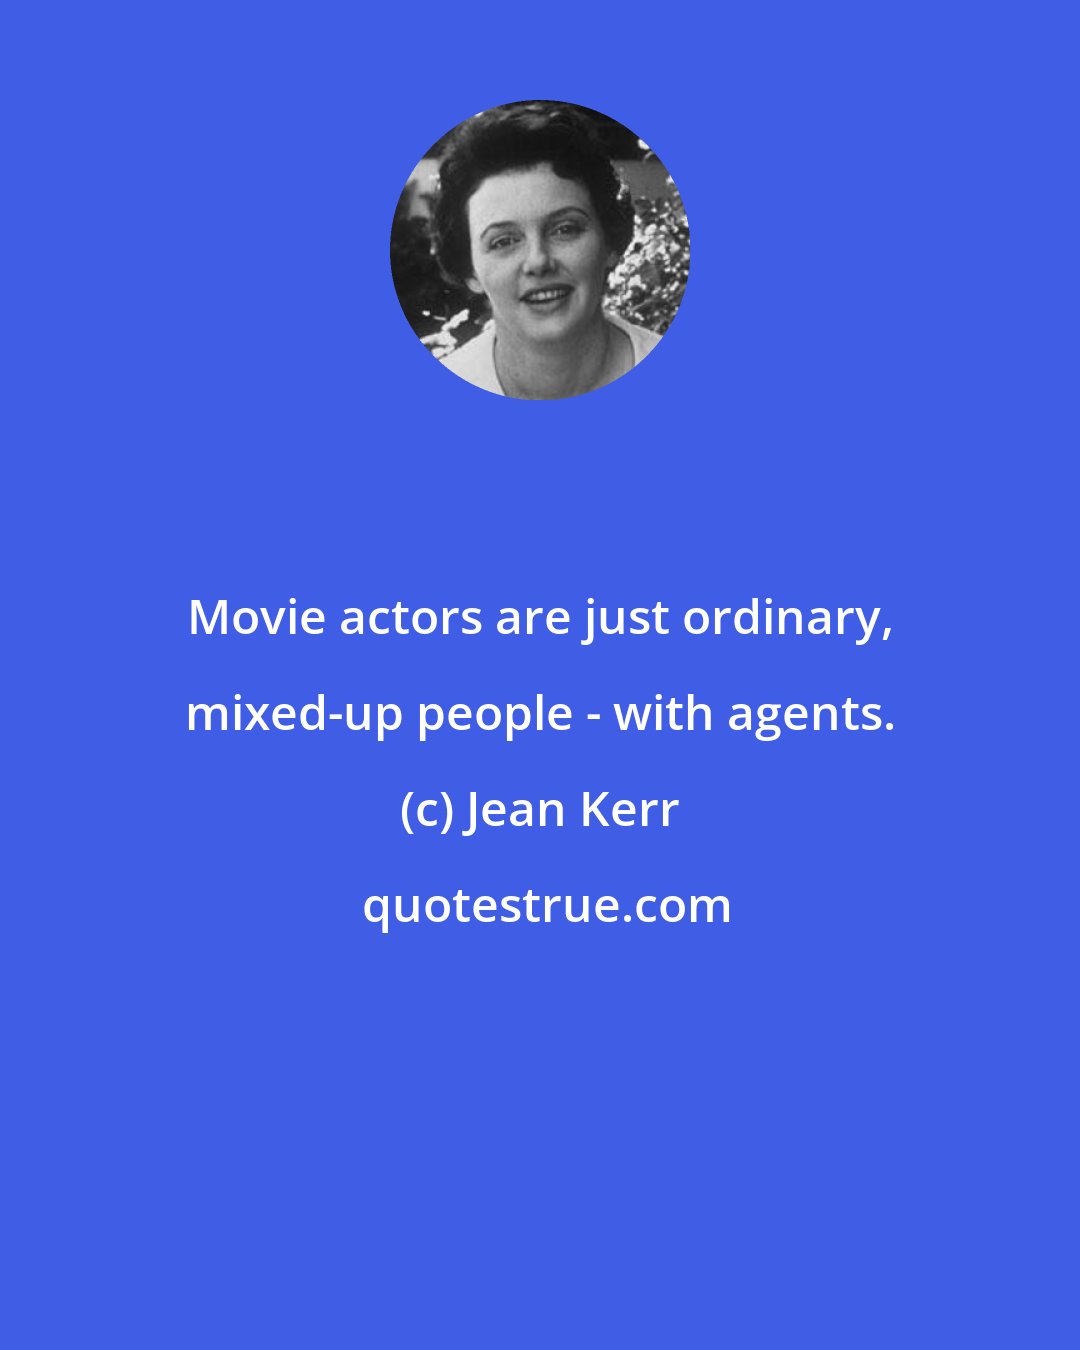 Jean Kerr: Movie actors are just ordinary, mixed-up people - with agents.